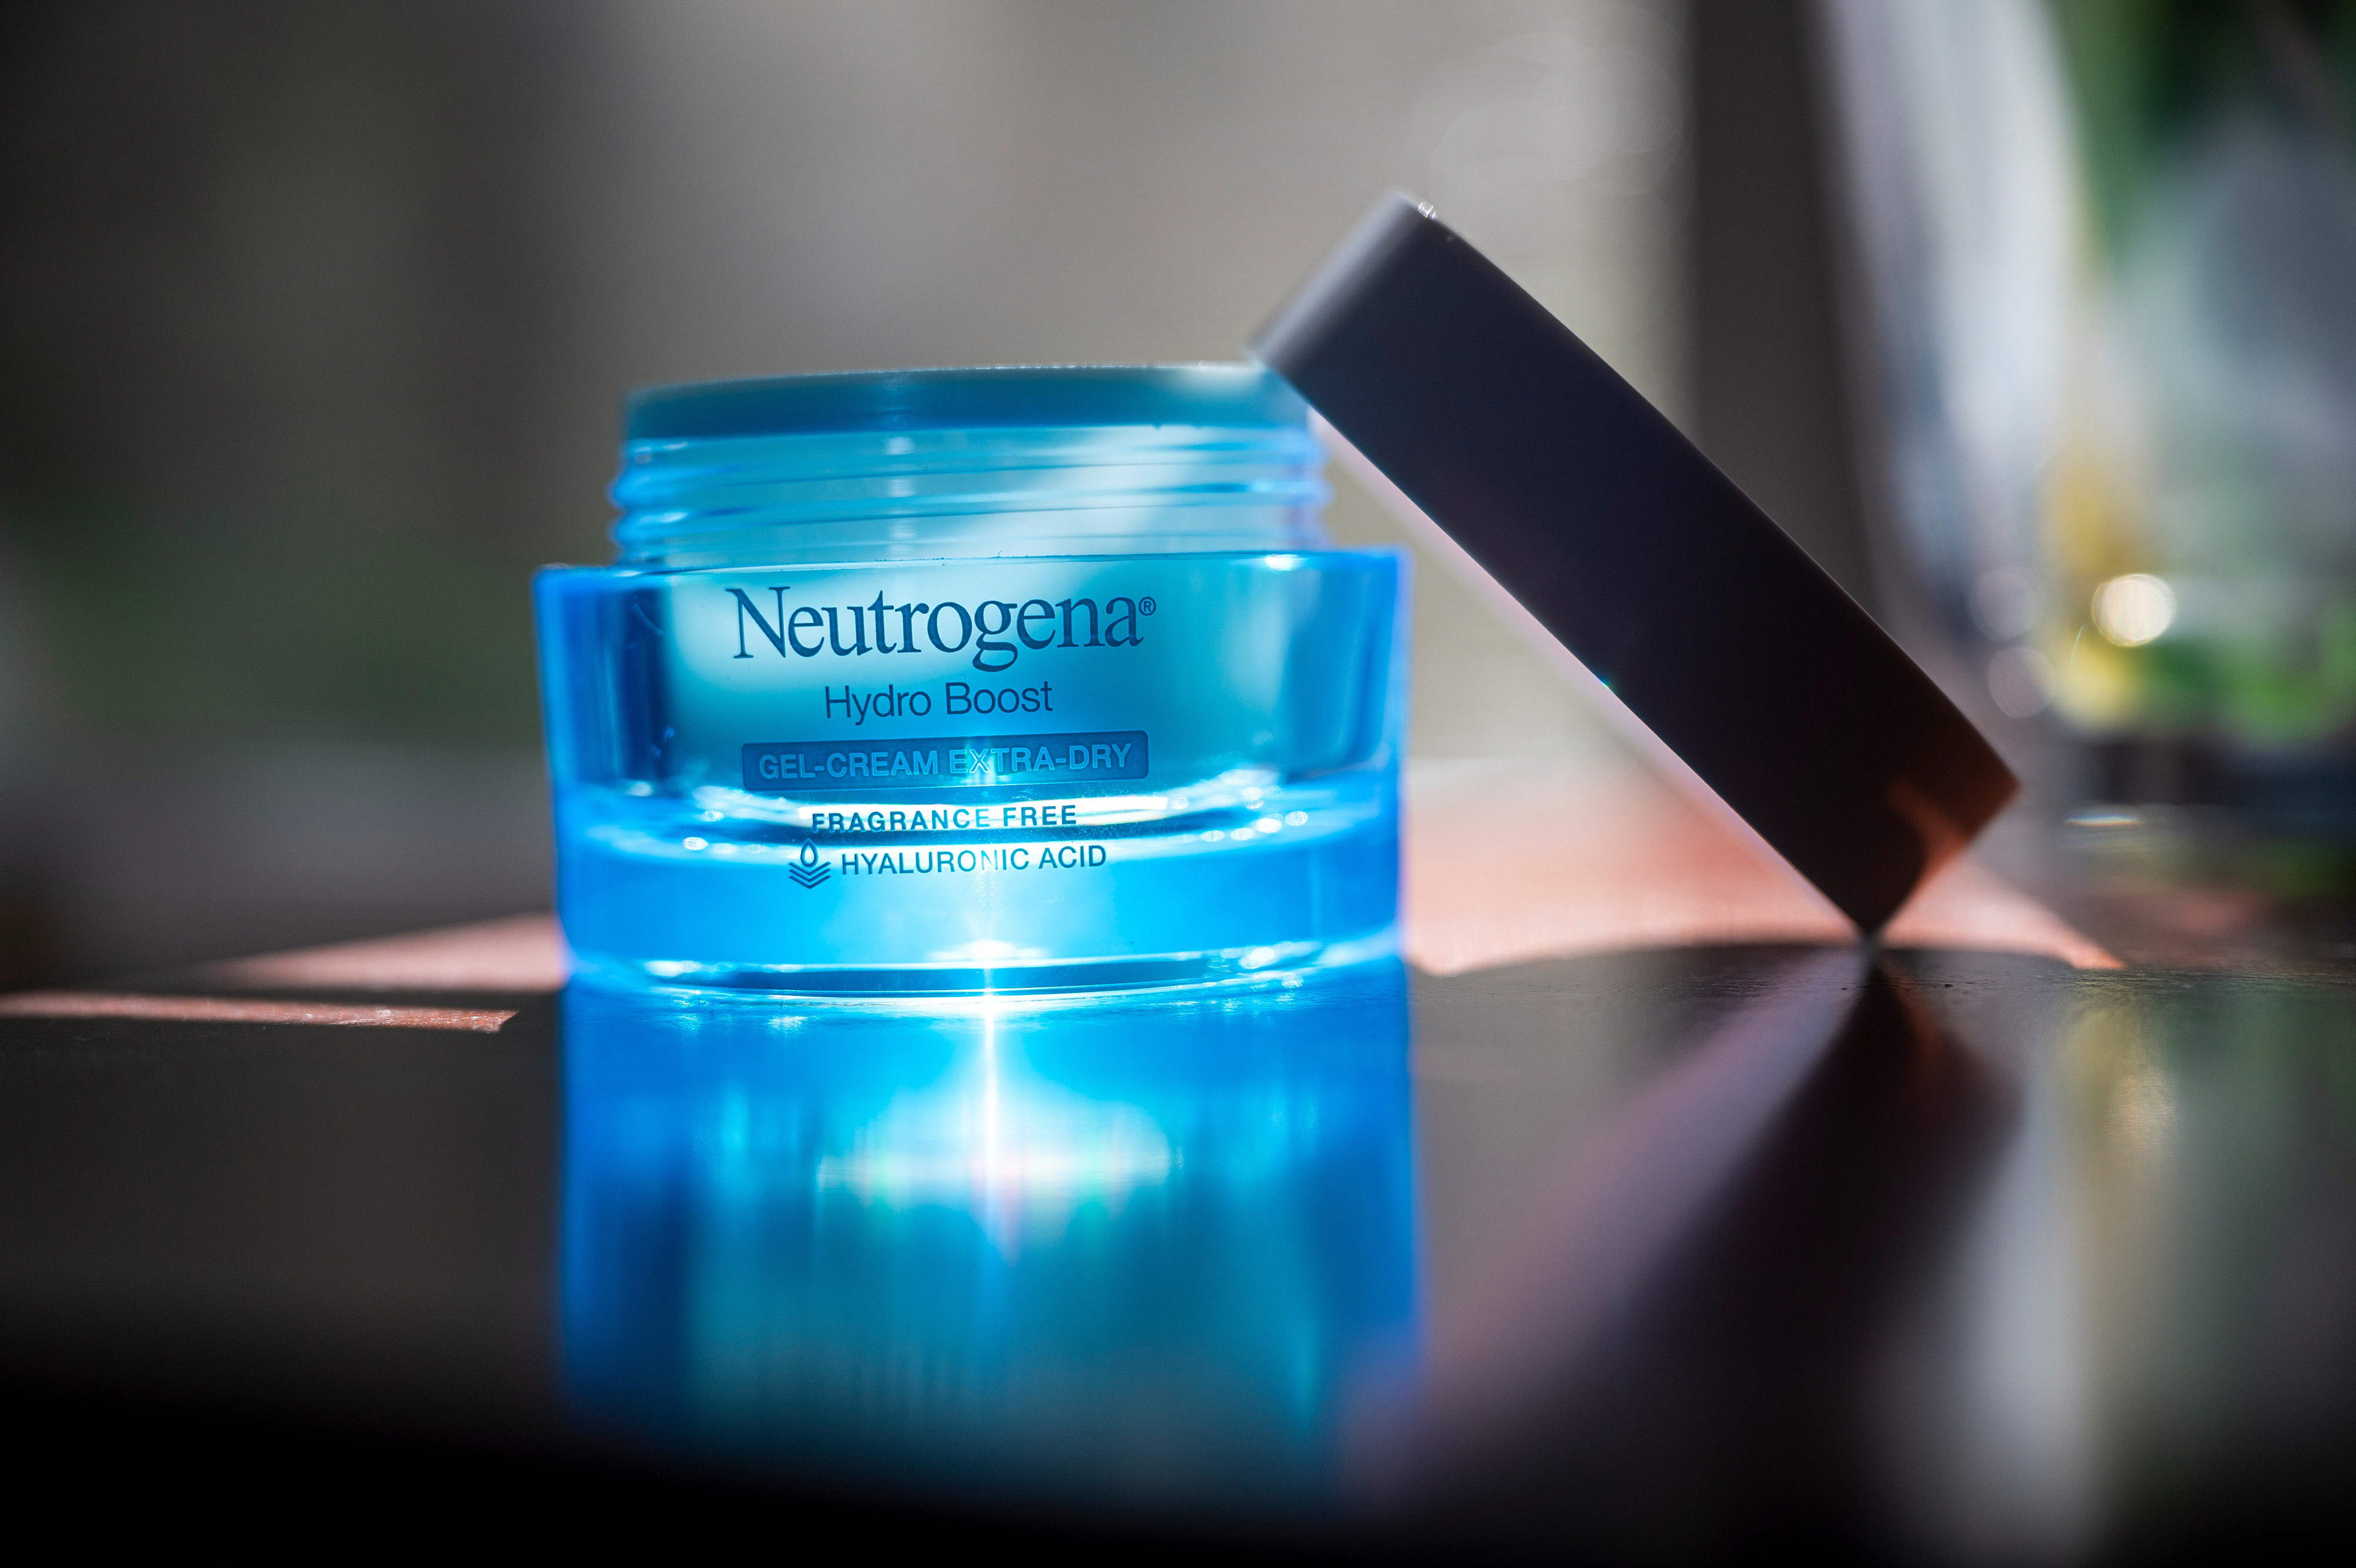 Kenvue Inc., which owns Neutrogena and Aveeno, has seen its skin-care market share plummet...